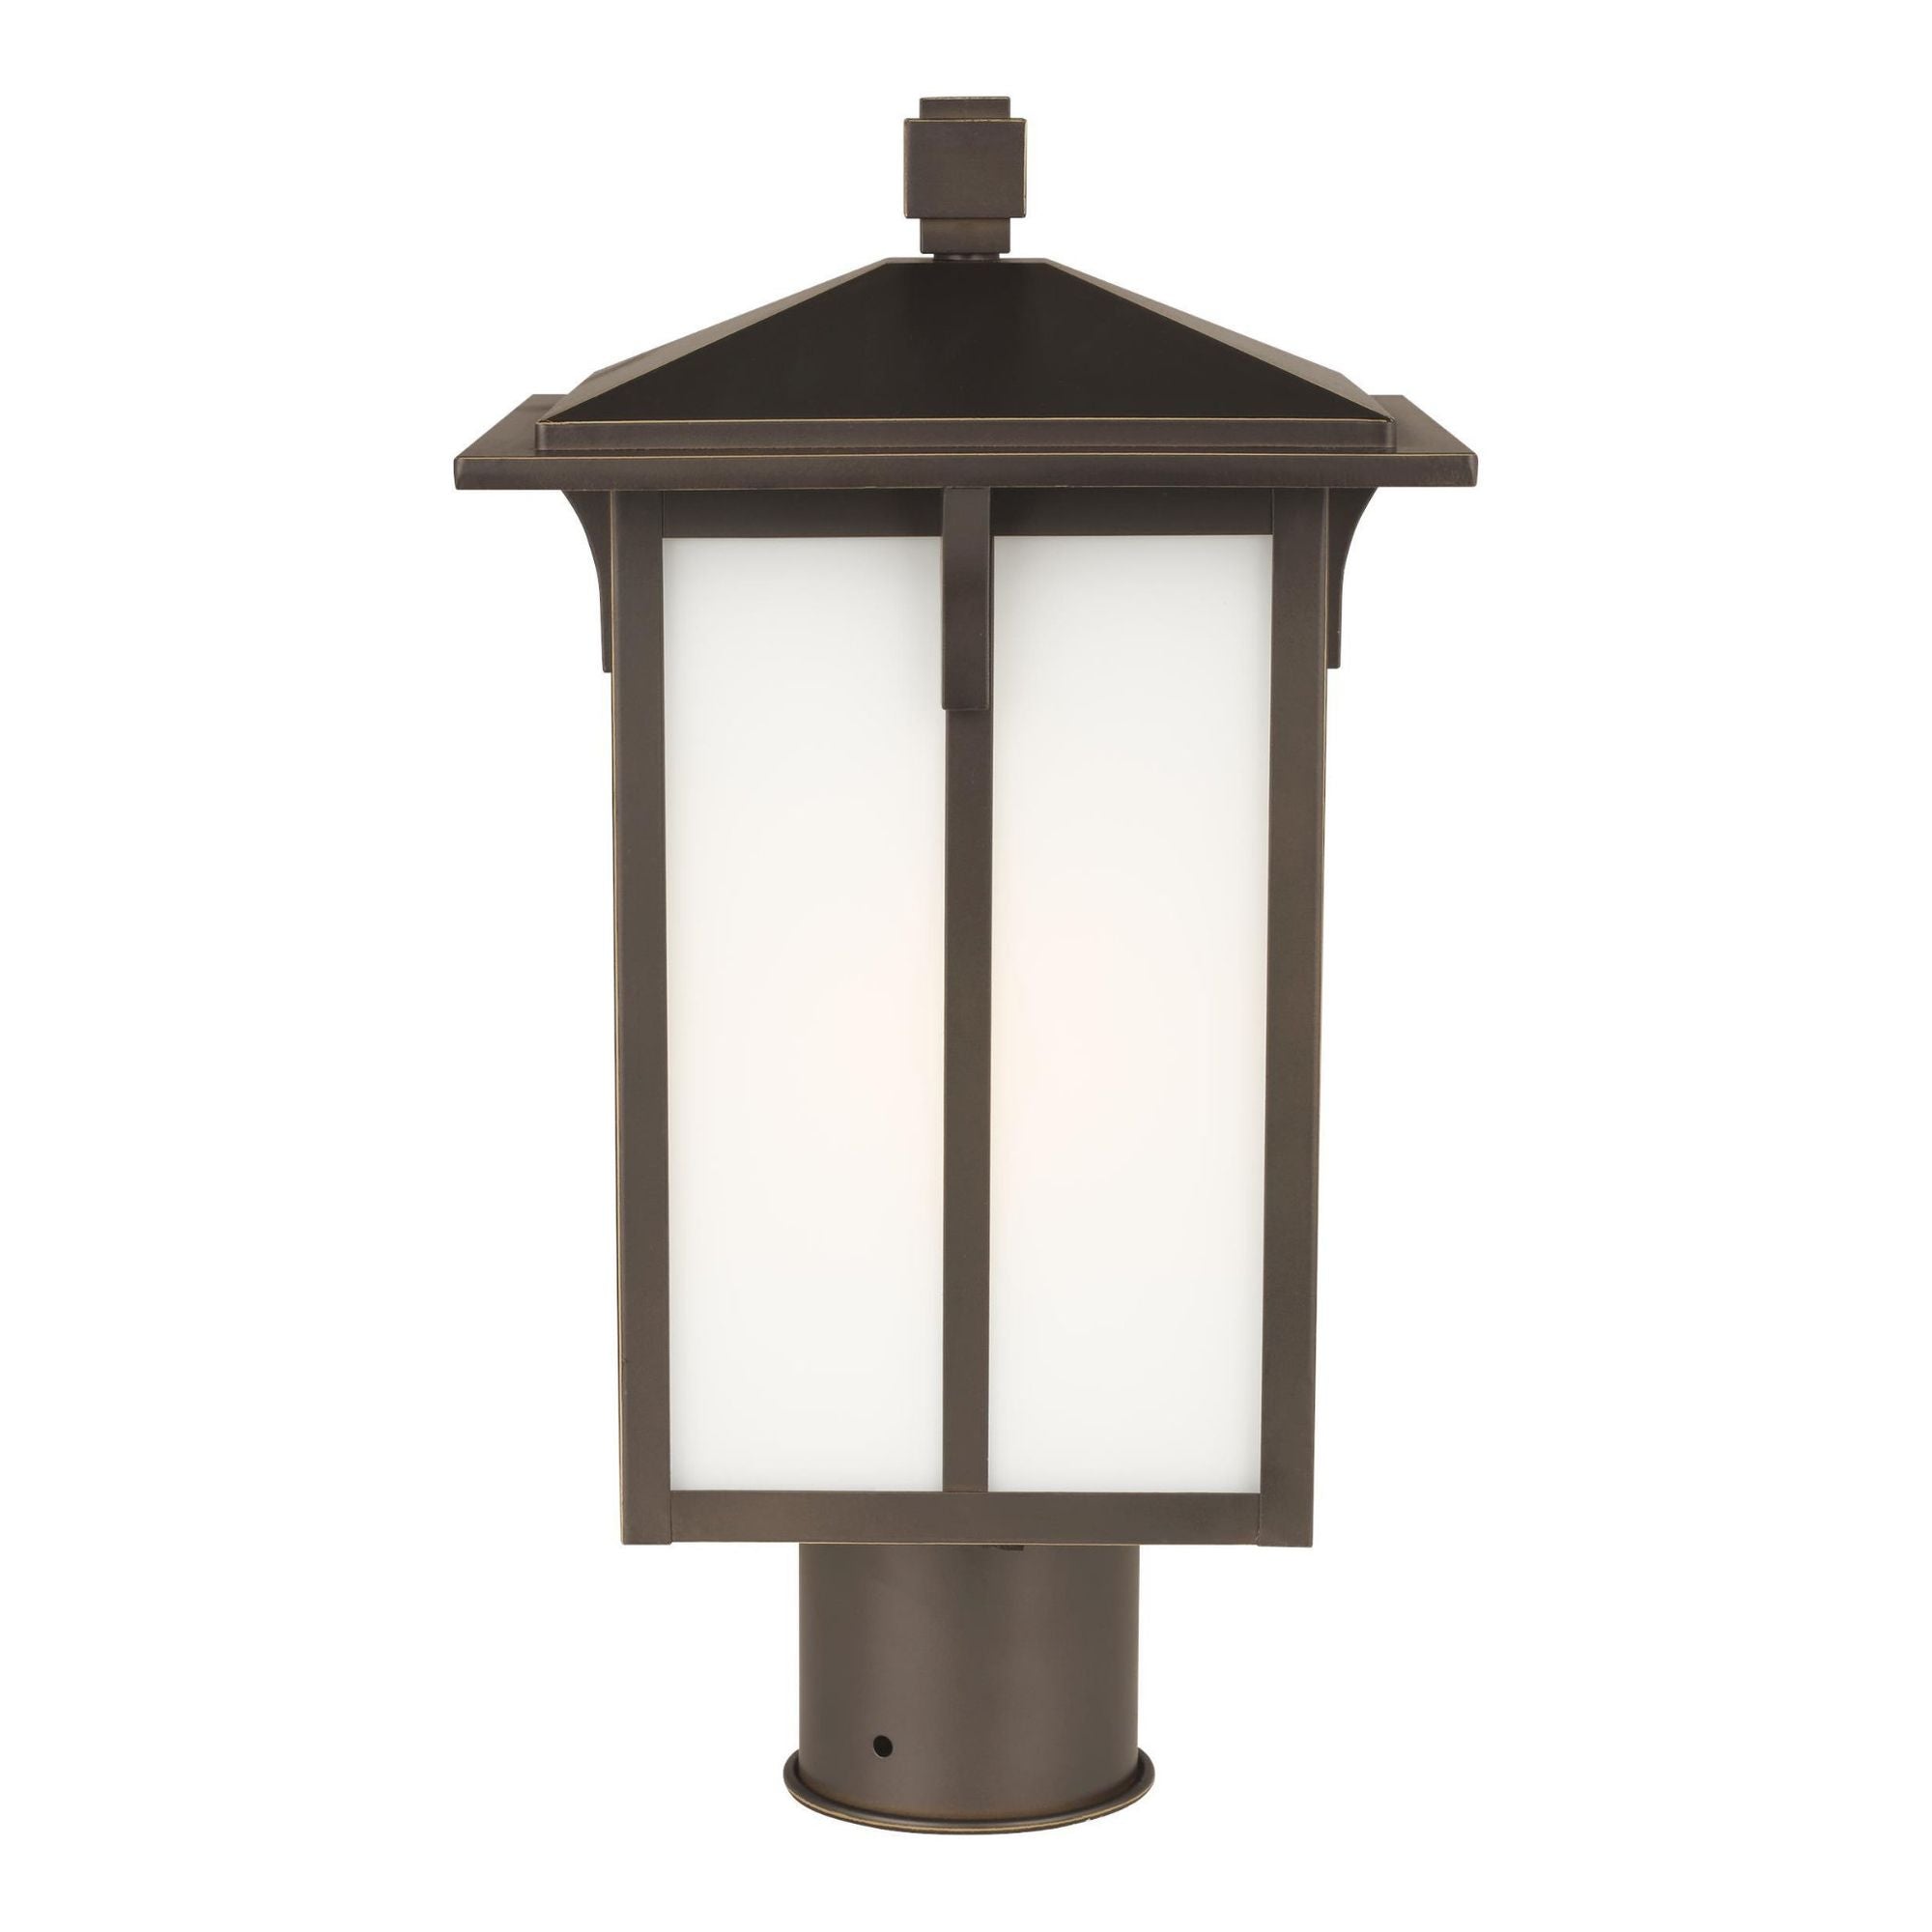 Tomek One Light Outdoor Post Lantern LED Transitional Fixture 8.375" Width 15.375" Height Aluminum Rectangular Etched / White Inside Shade in Antique Bronze